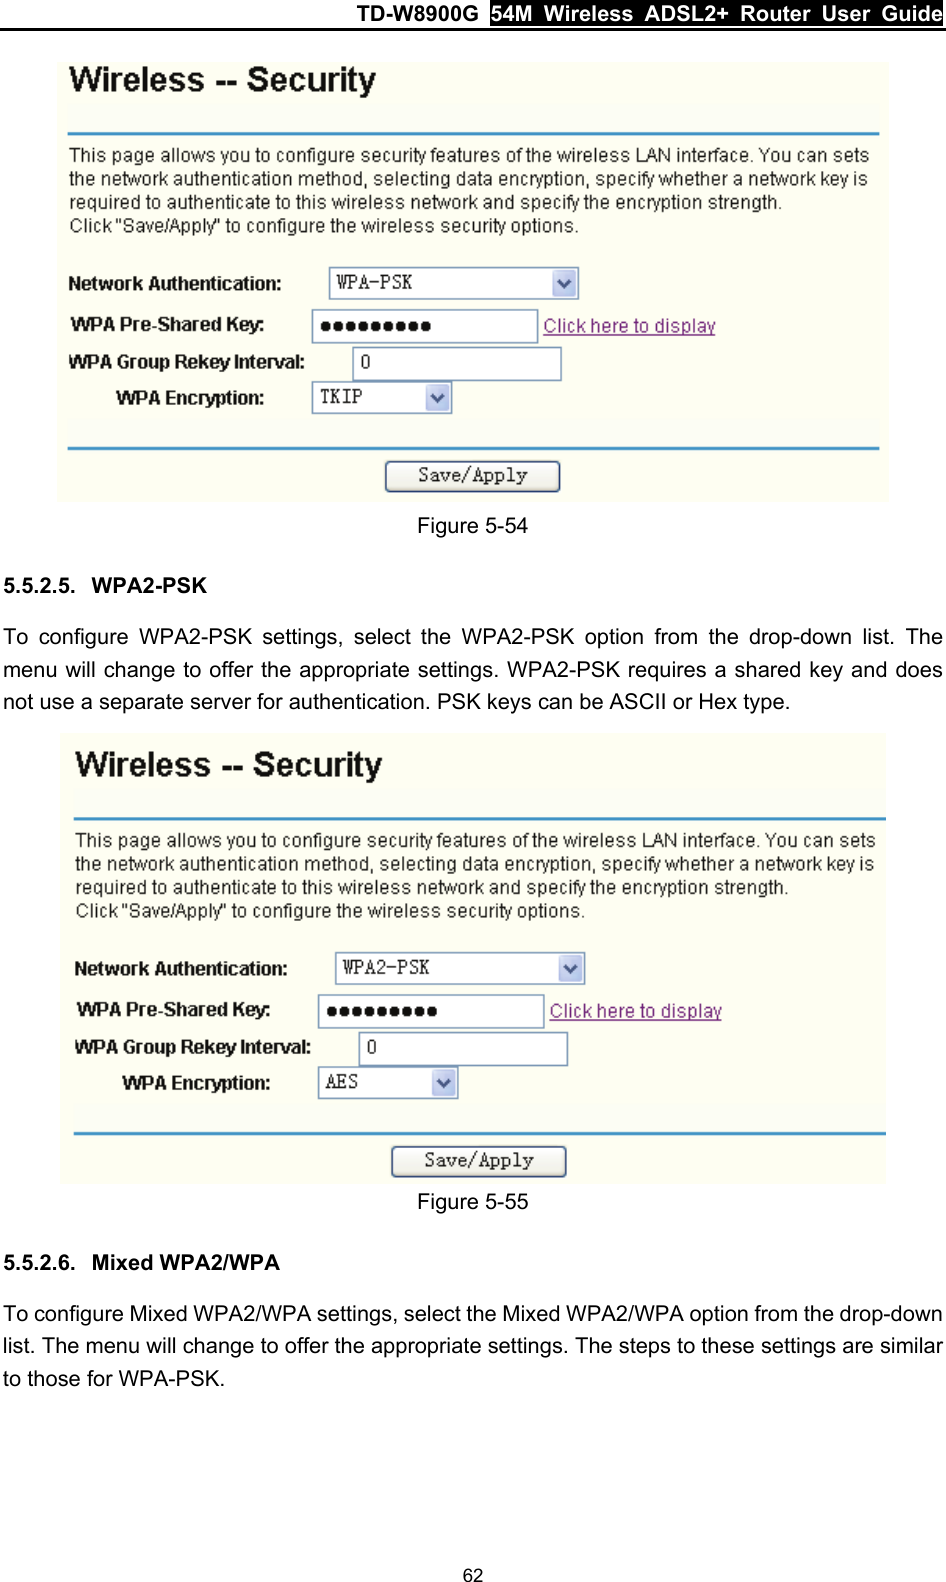 TD-W8900G  54M Wireless ADSL2+ Router User Guide 62  Figure 5-54 5.5.2.5.  WPA2-PSK To configure WPA2-PSK settings, select the WPA2-PSK option from the drop-down list. The menu will change to offer the appropriate settings. WPA2-PSK requires a shared key and does not use a separate server for authentication. PSK keys can be ASCII or Hex type.  Figure 5-55 5.5.2.6.  Mixed WPA2/WPA To configure Mixed WPA2/WPA settings, select the Mixed WPA2/WPA option from the drop-down list. The menu will change to offer the appropriate settings. The steps to these settings are similar to those for WPA-PSK. 